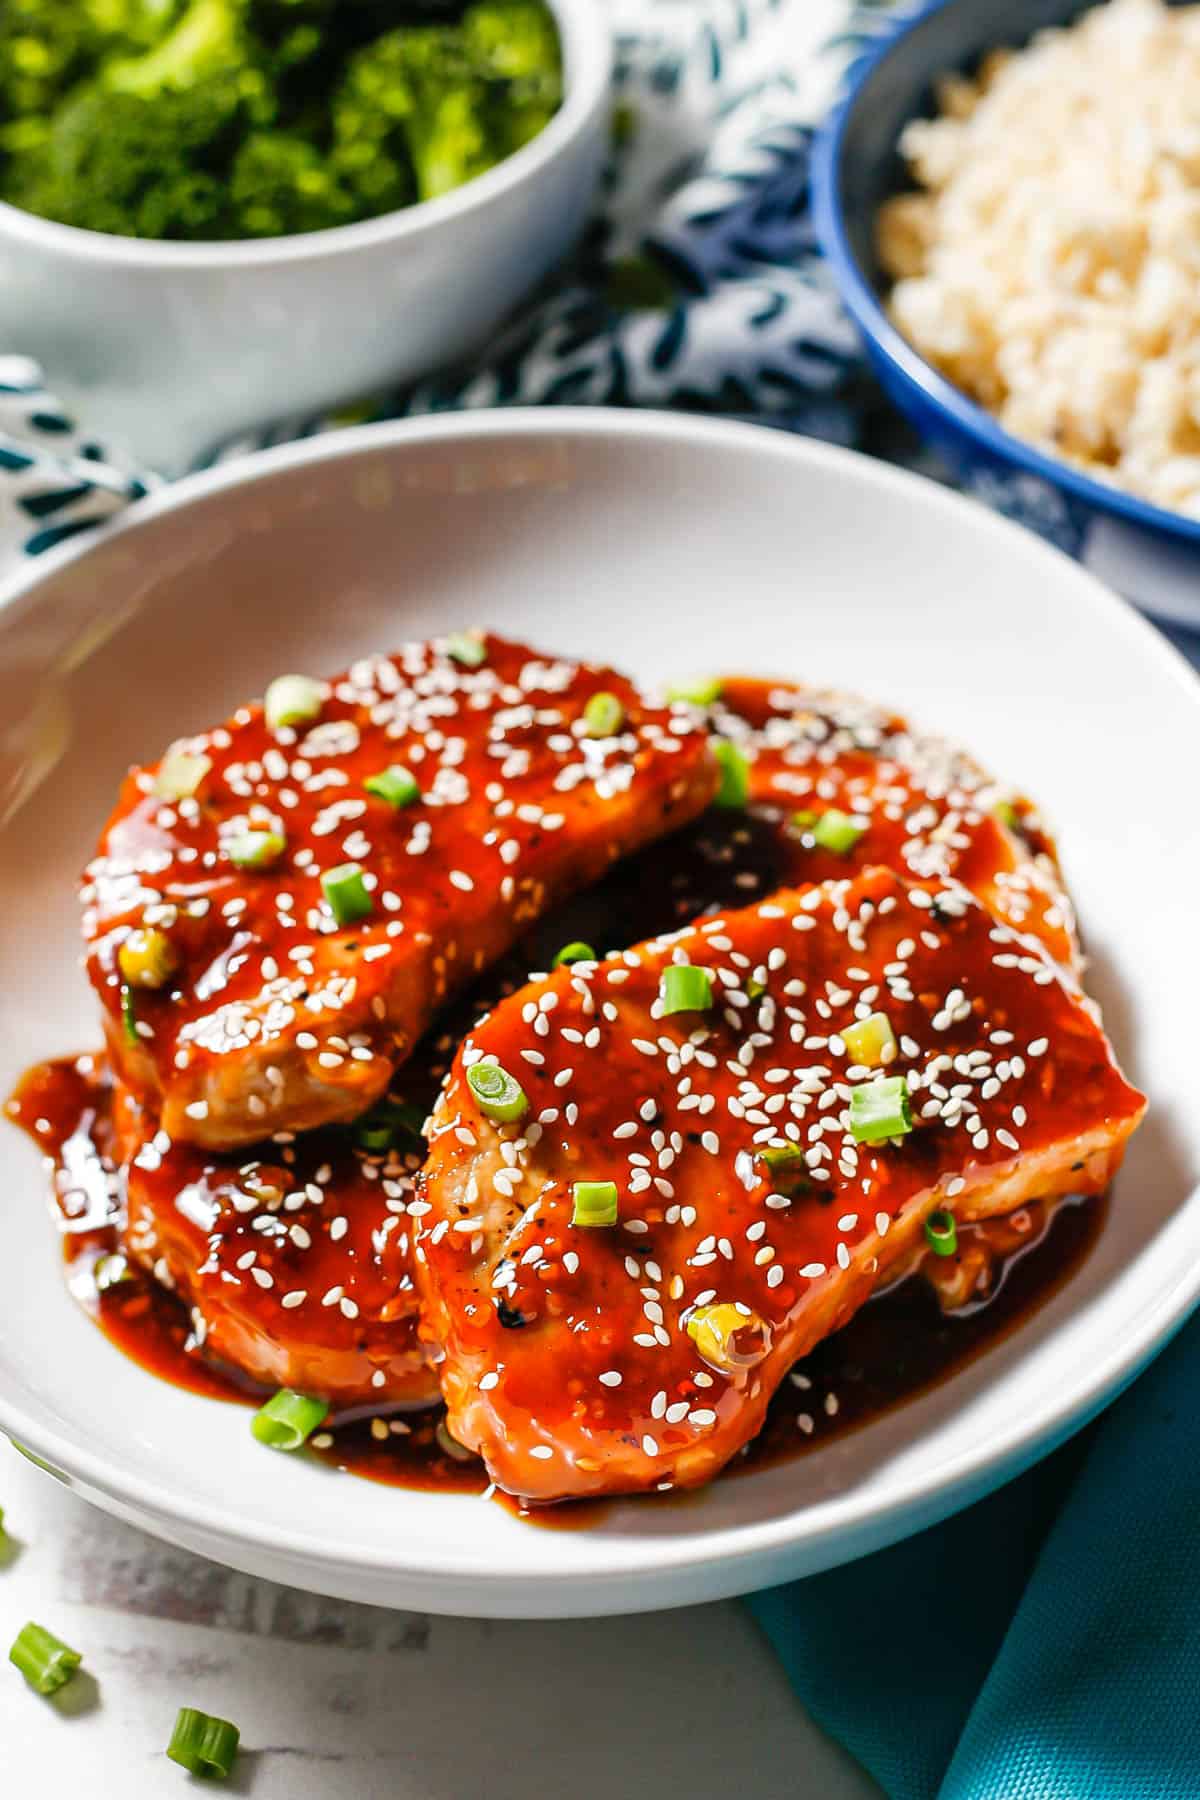 Honey garlic pork chops served in a white bowl with extra sauce and sesame seeds and sliced green onions sprinkled on top.